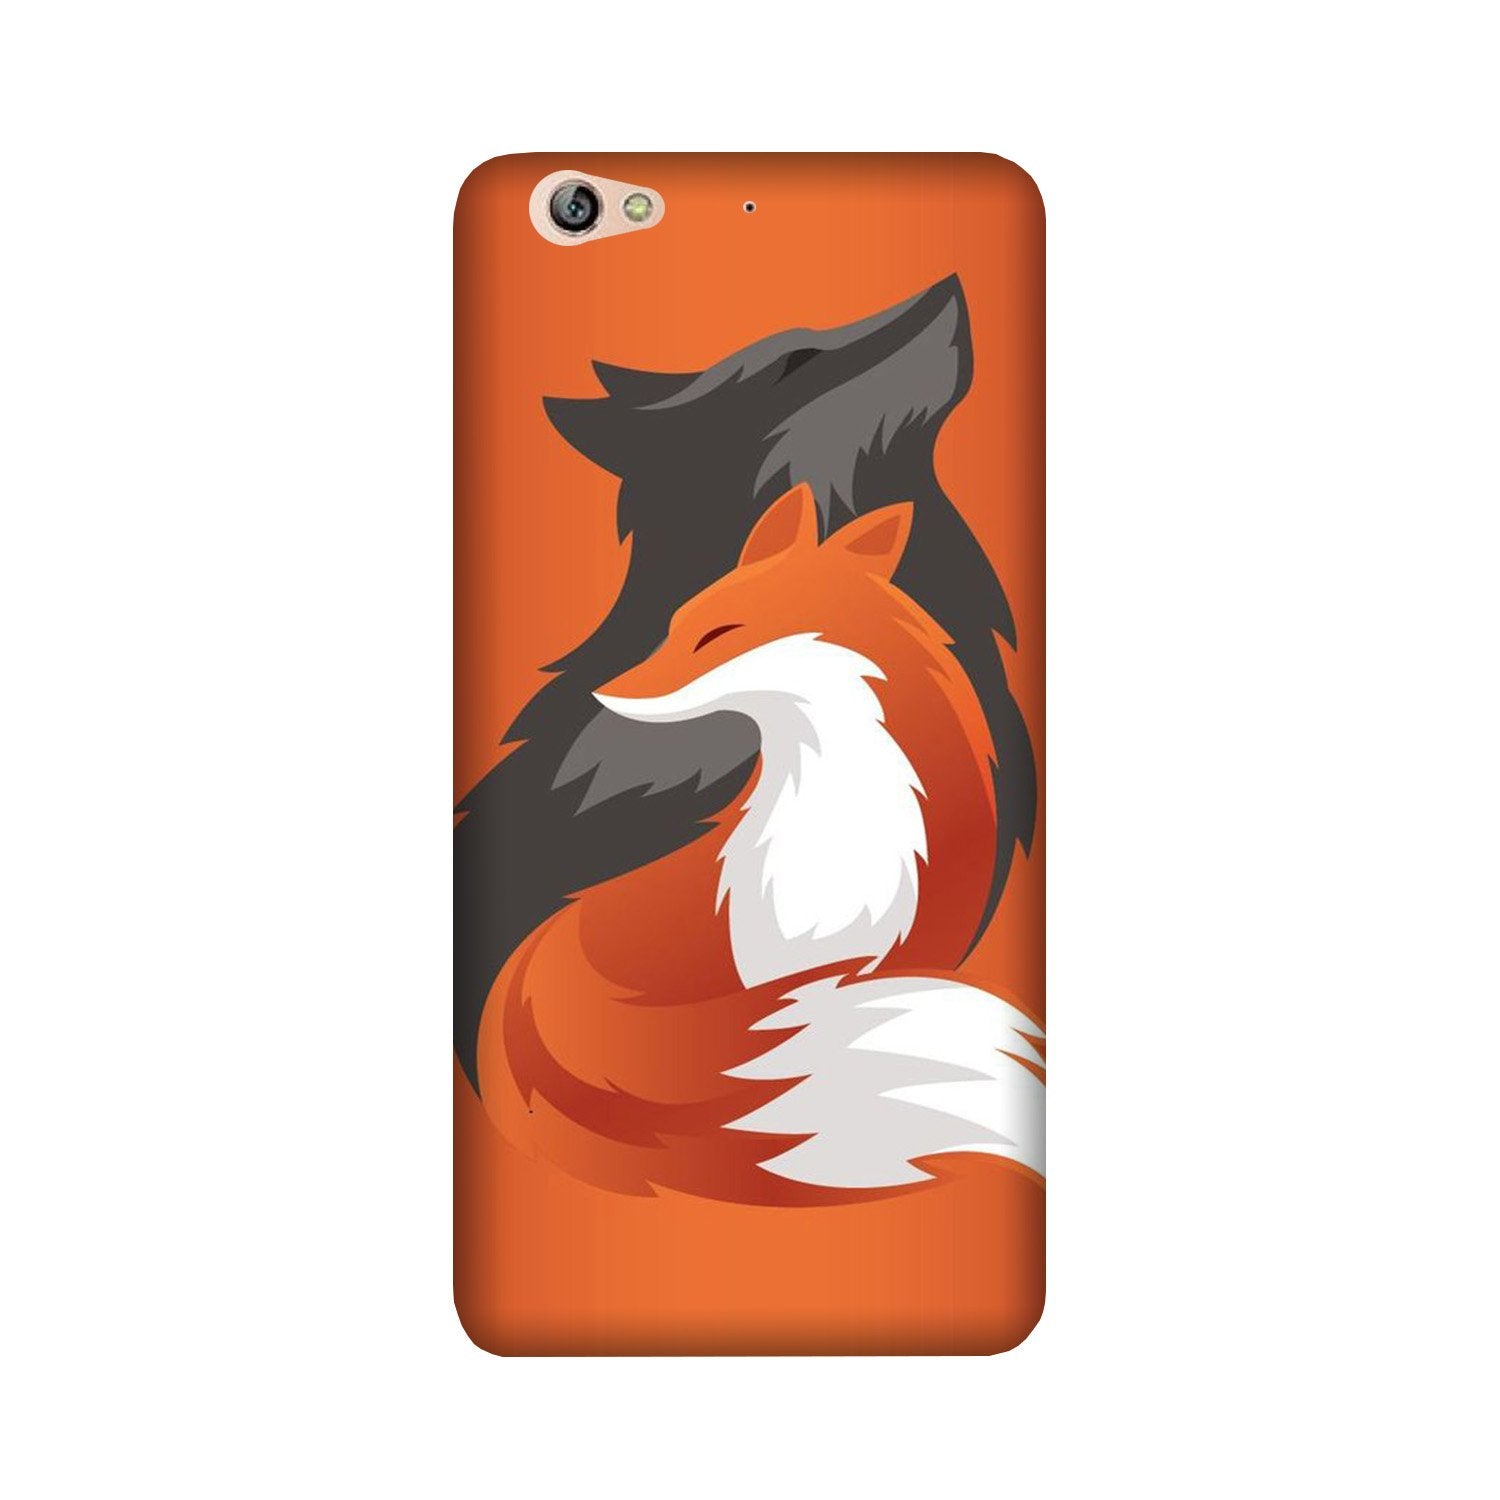 WolfCase for Gionee S6 (Design No. 224)